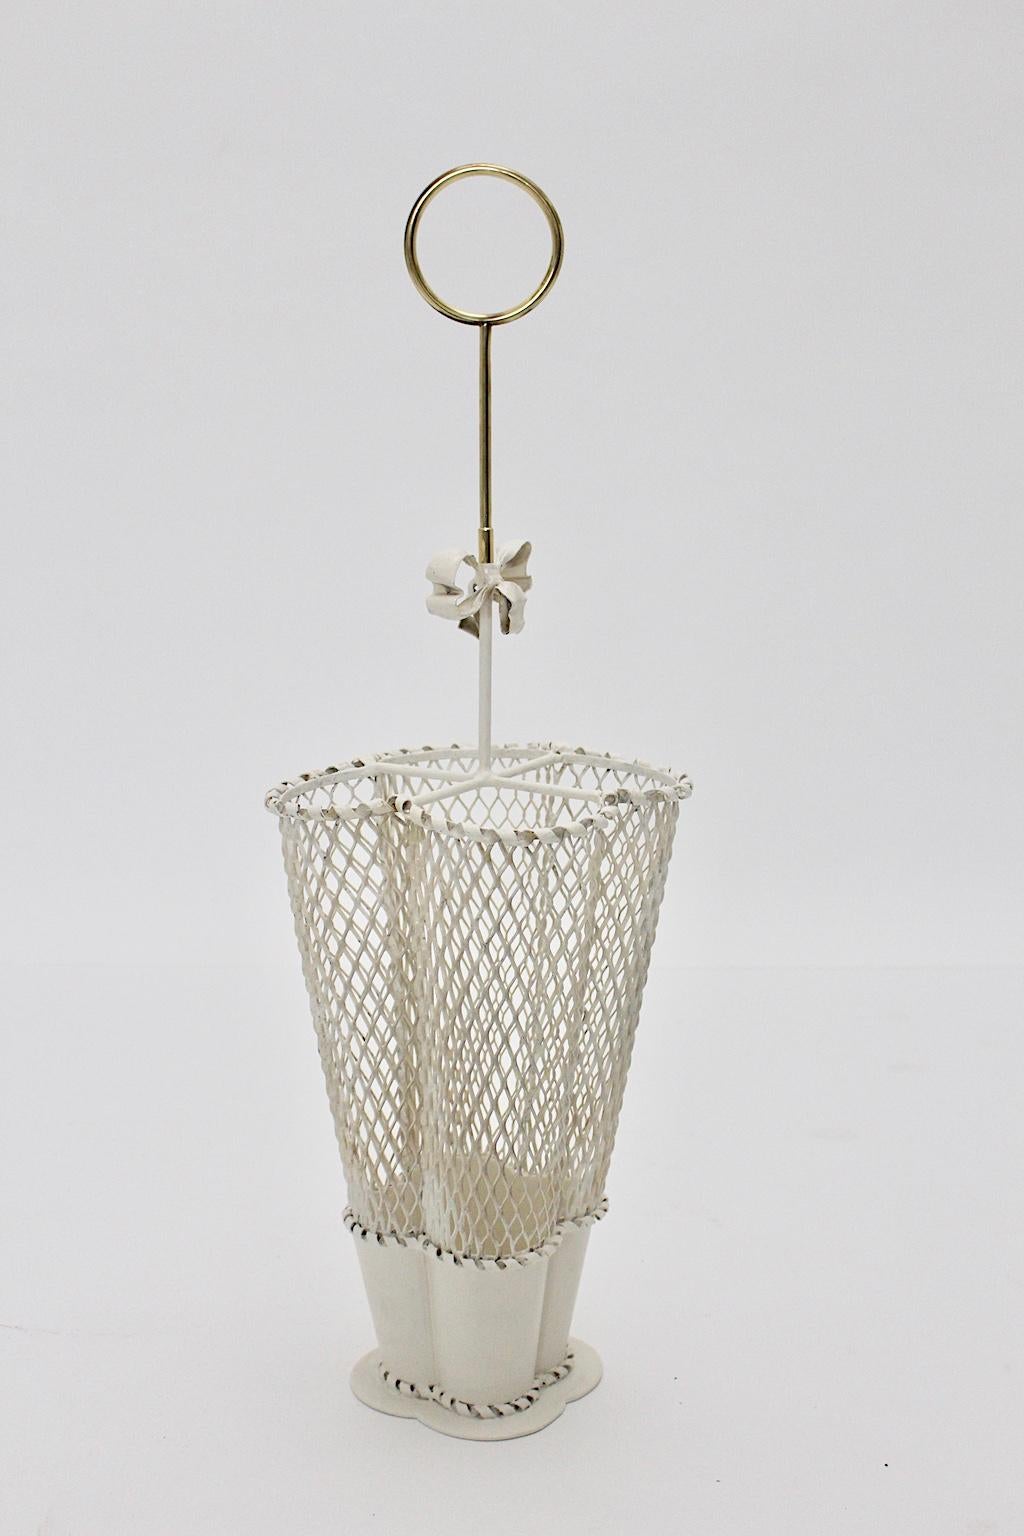 The charming vintage brass and white metal umbrella stand was designed by Mathieu Mategot and executed by Atelier Mategot, 1950s.
The umbrella stand was made of perforated white lacquered metal and shows also a brass handle and a nice bow.
Very